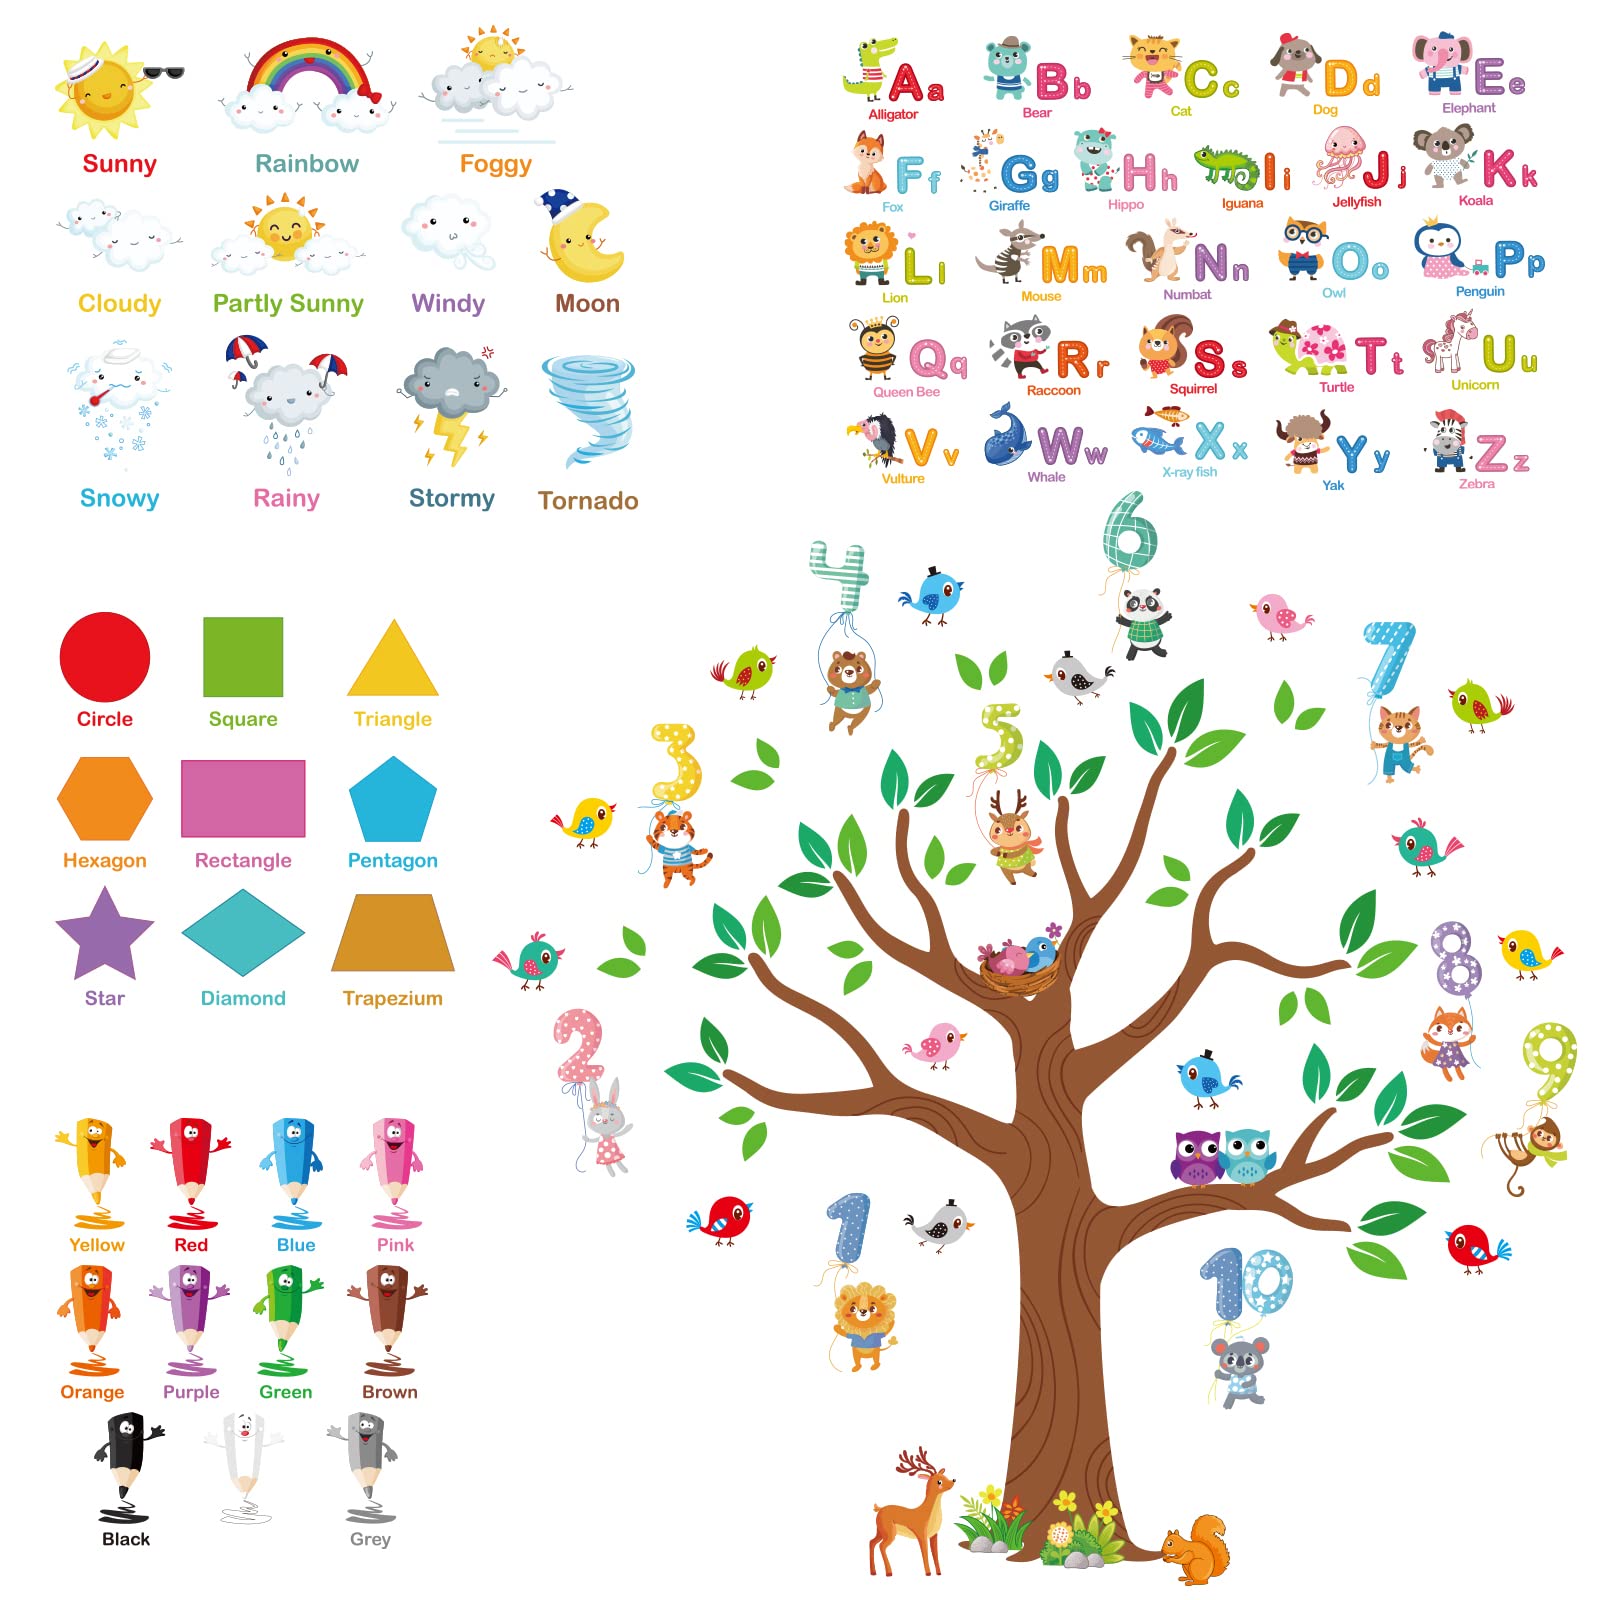 Matogle Animal Alphabet ABC and Number Tree Wall Stickers with Color Shape Weather Wall Decals Self-Adhesive for Kids Preschool Education Children Living Room Deco (4 Sheets)